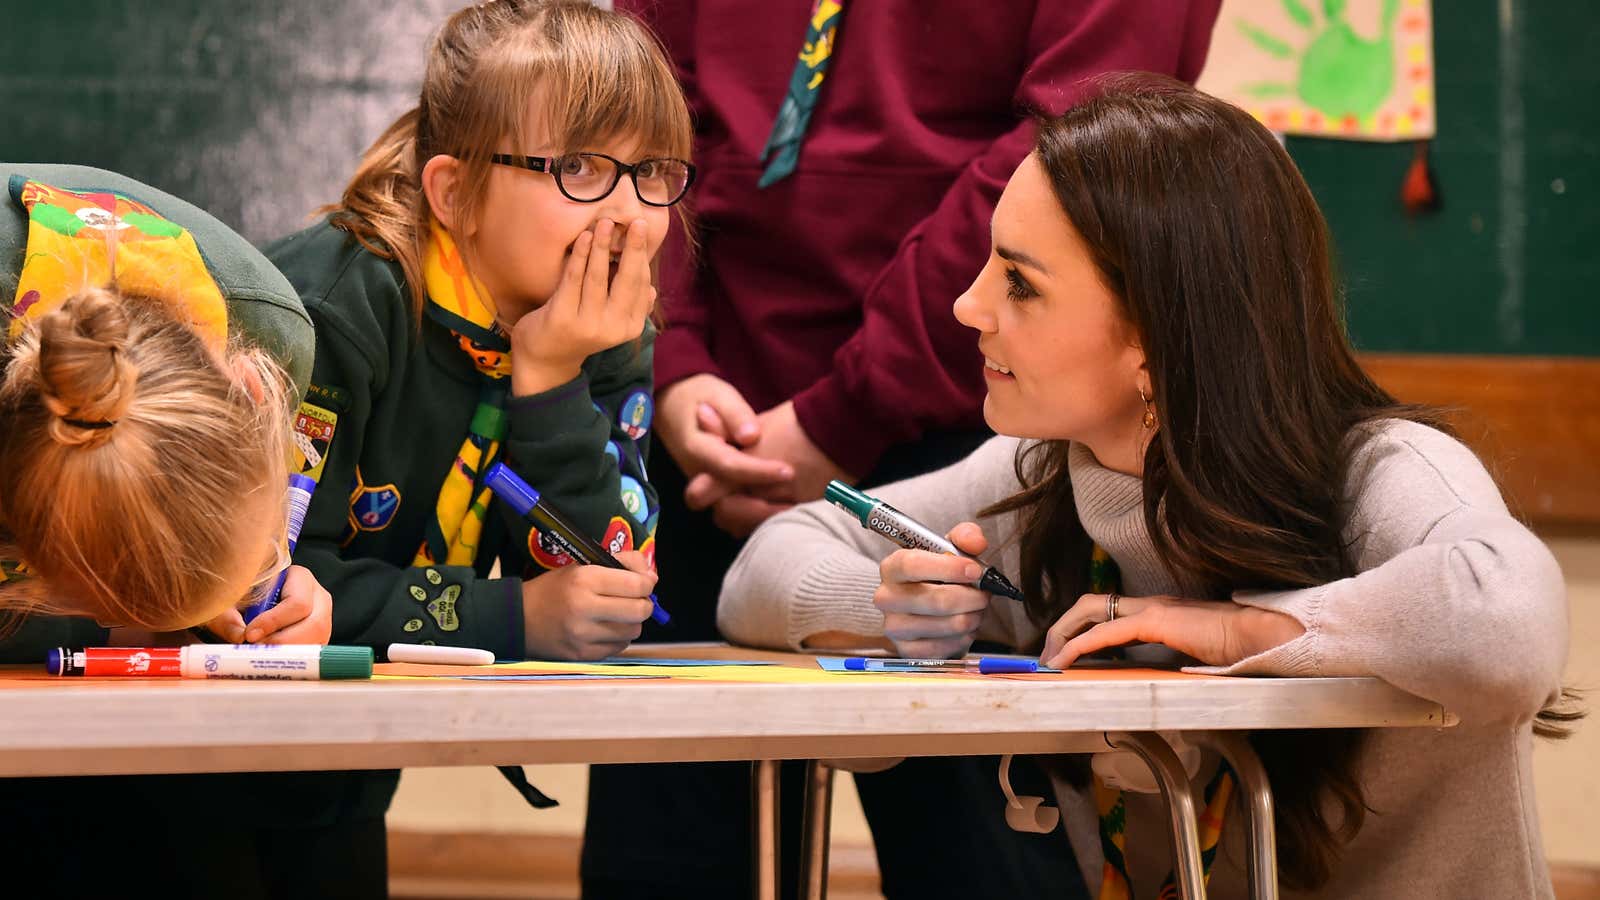 Britain’s Catherine, Duchess of Cambridge, talks to cubs during a Cub Scout Pack meeting with cubs from the Kings Lynn District, in Kings Lynn, Britain, December 14, 2016, during an event to celebrate 100 years of Cubs. REUTERS/Ben Stansall/Pool – RC1FEF9C0730